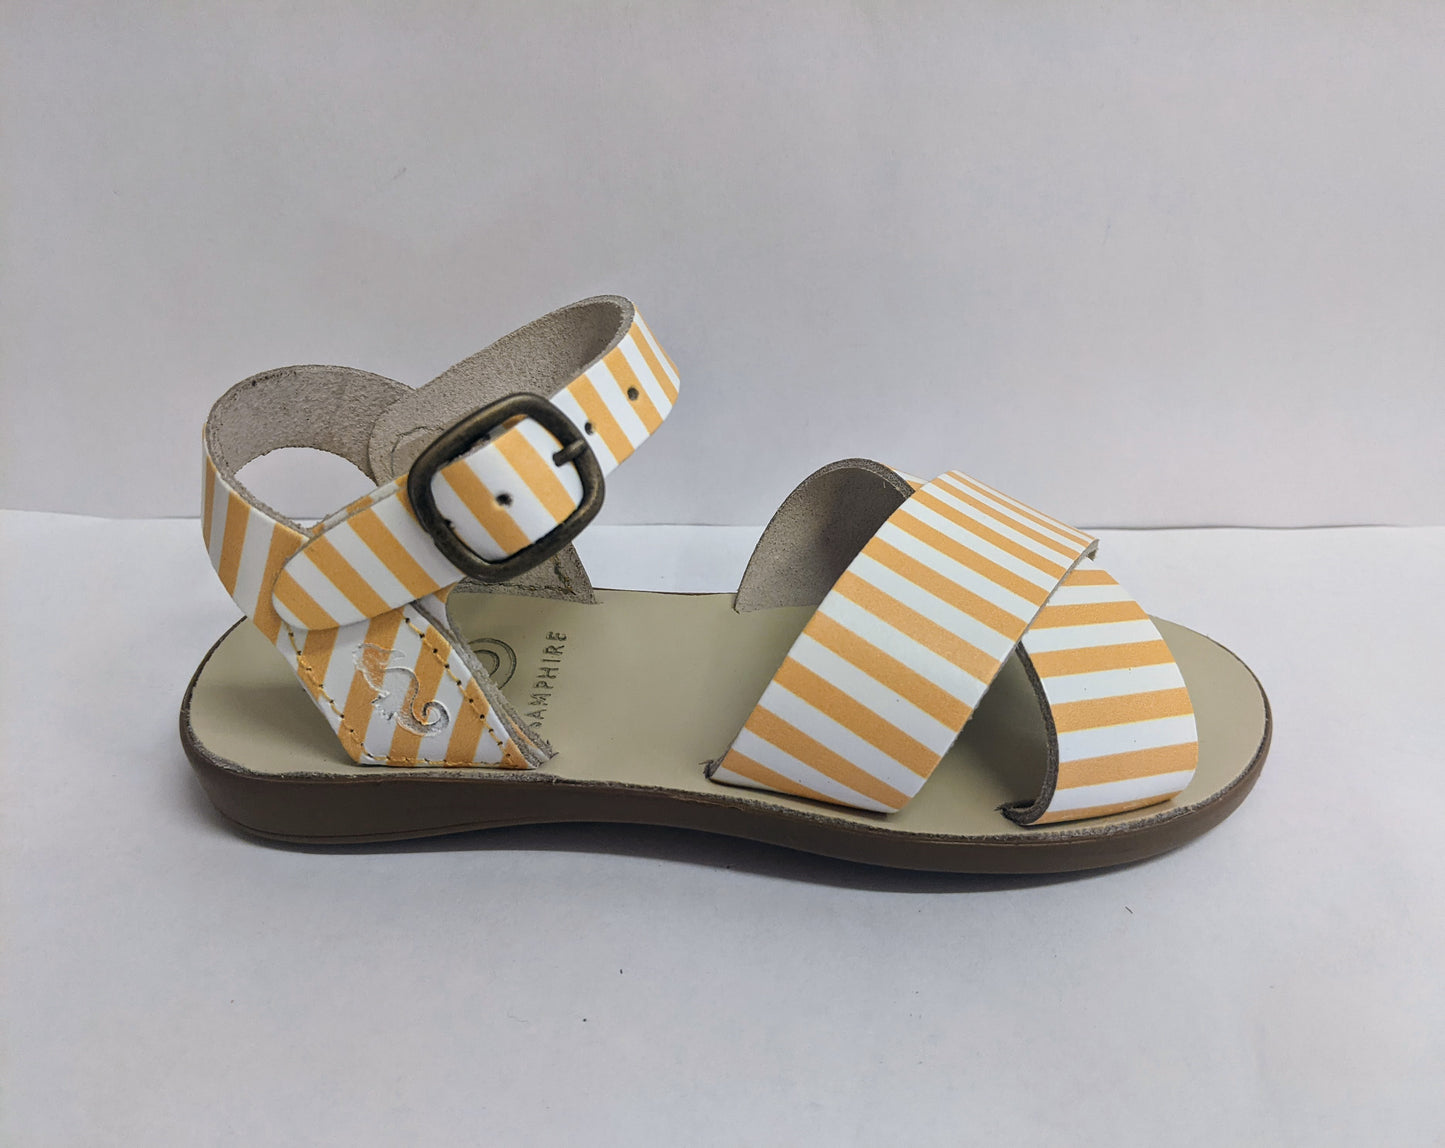 A girls sandal by Petasil Samphire,style Jamina, in yellow and white with buckle fastening. Right side view.